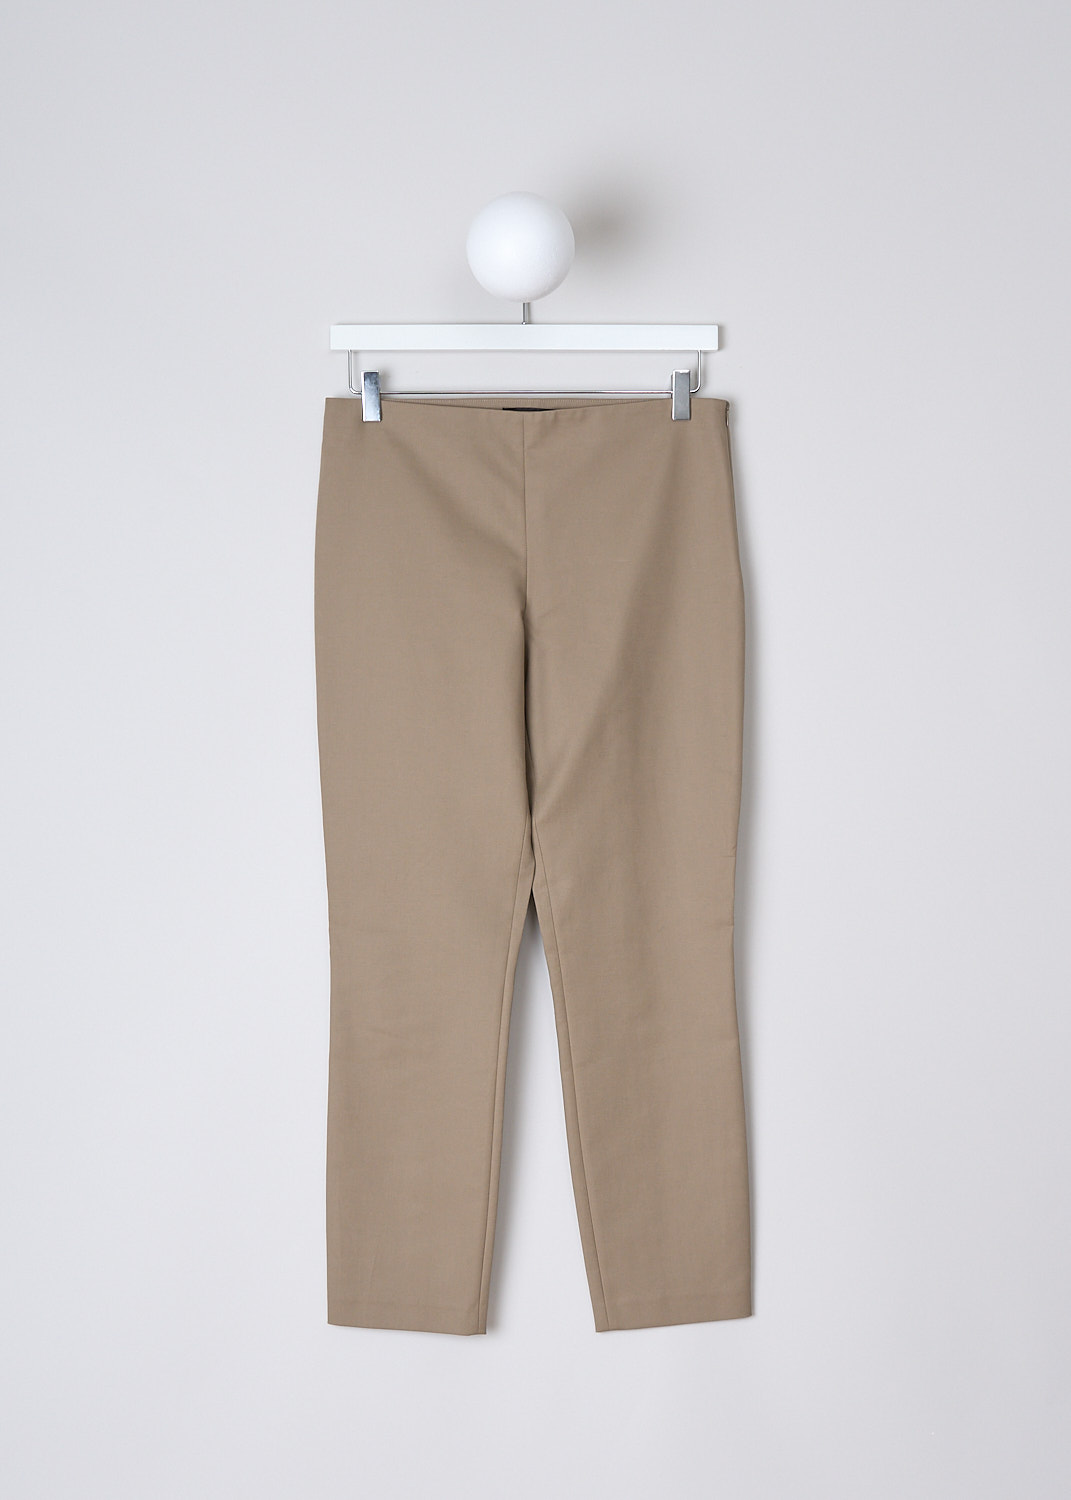 THE ROW, SOROC PANTS IN SEPIA, SOROC_PANT_396W580_SEPIA, Beige, Front, These straight fitted Soroc pants in Sepia have a high waist and ankle length pant legs with centre seams in the back. A concealed zipper on one side function as the closure. 